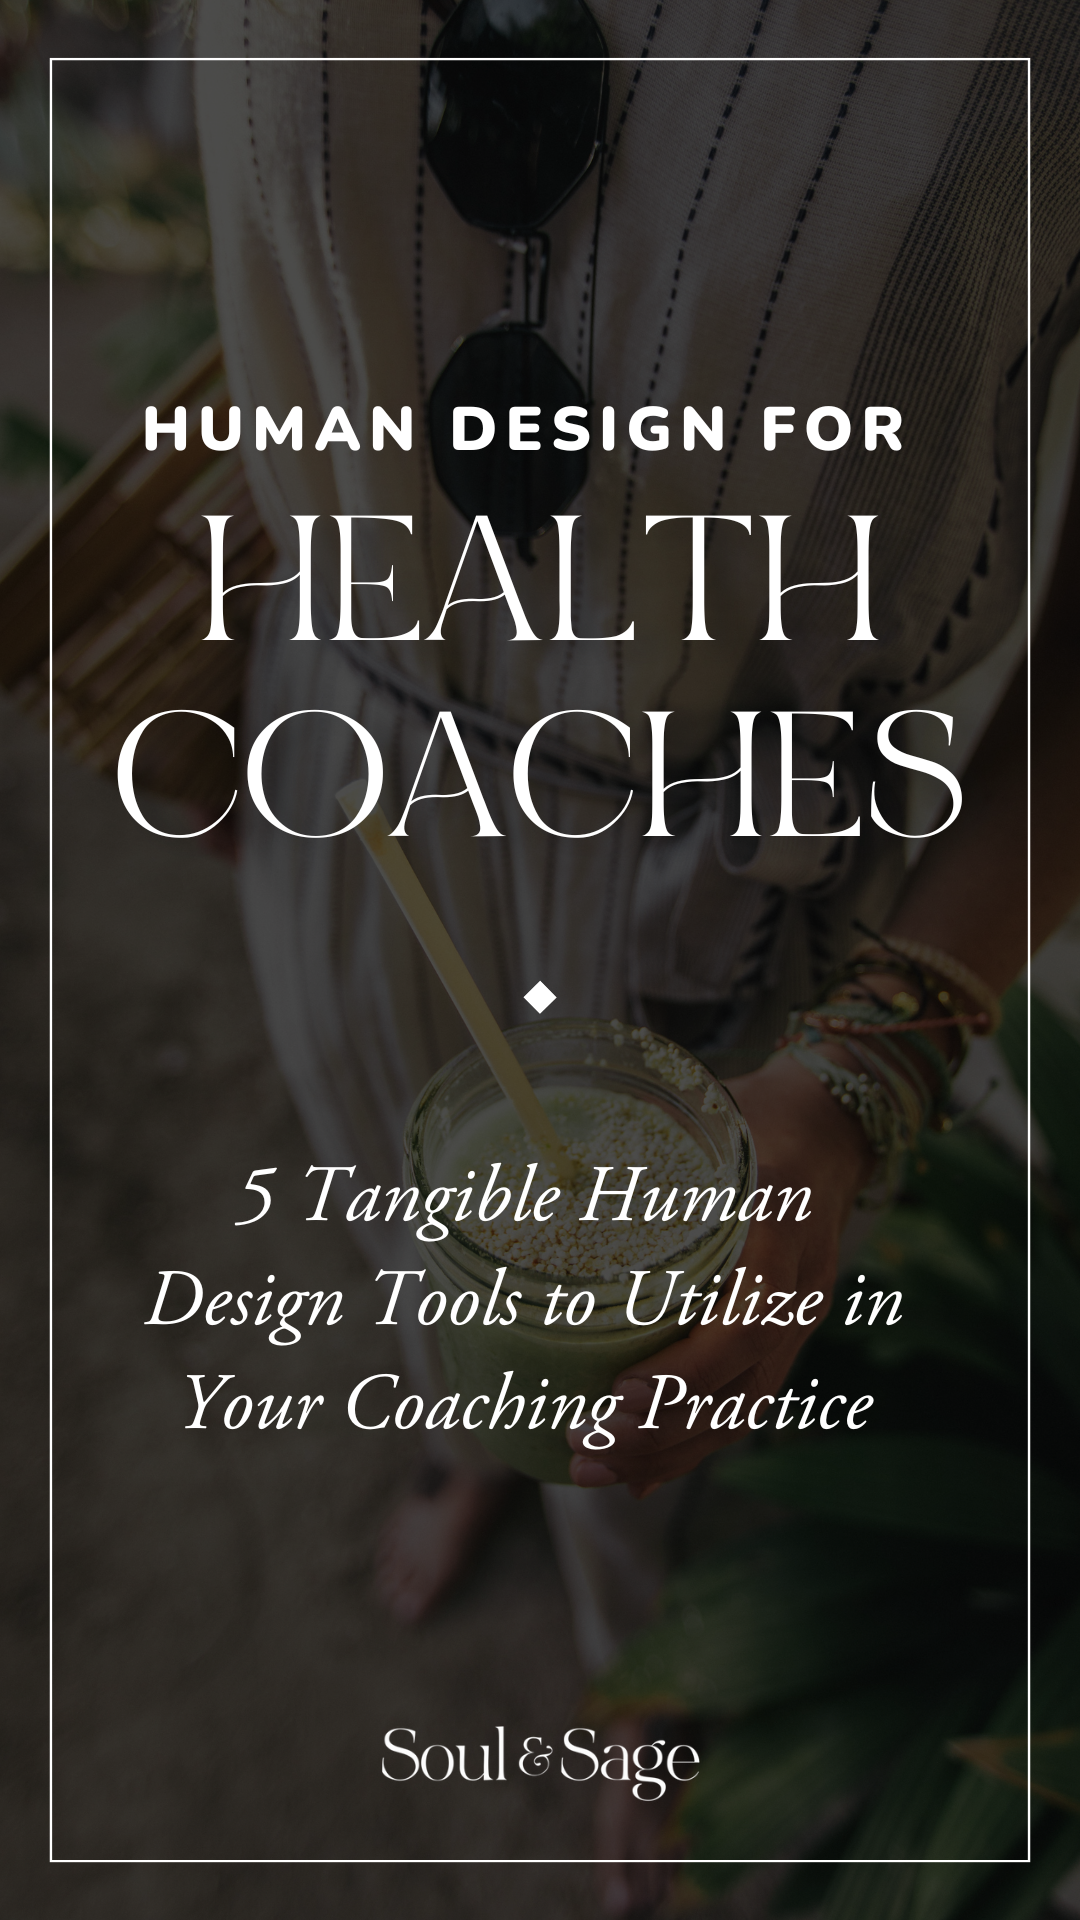 Human Design for Health Coaches - Five Tangible Human Design Tools to Utilize in Your Coaching Practice